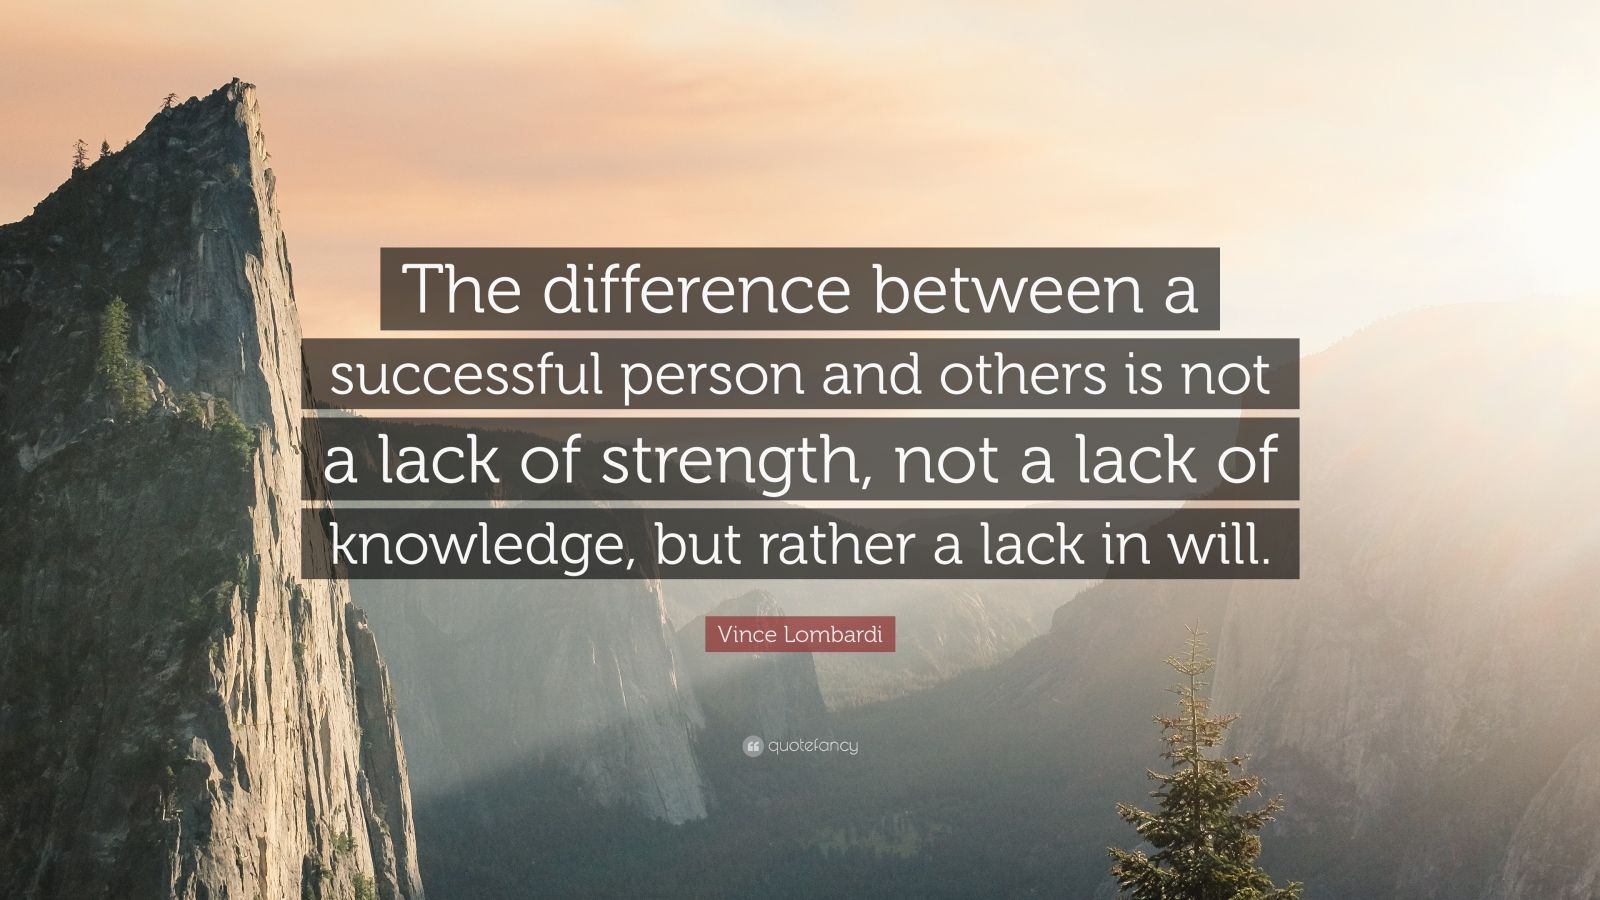 Vince Lombardi Quote: "The difference between a successful ...